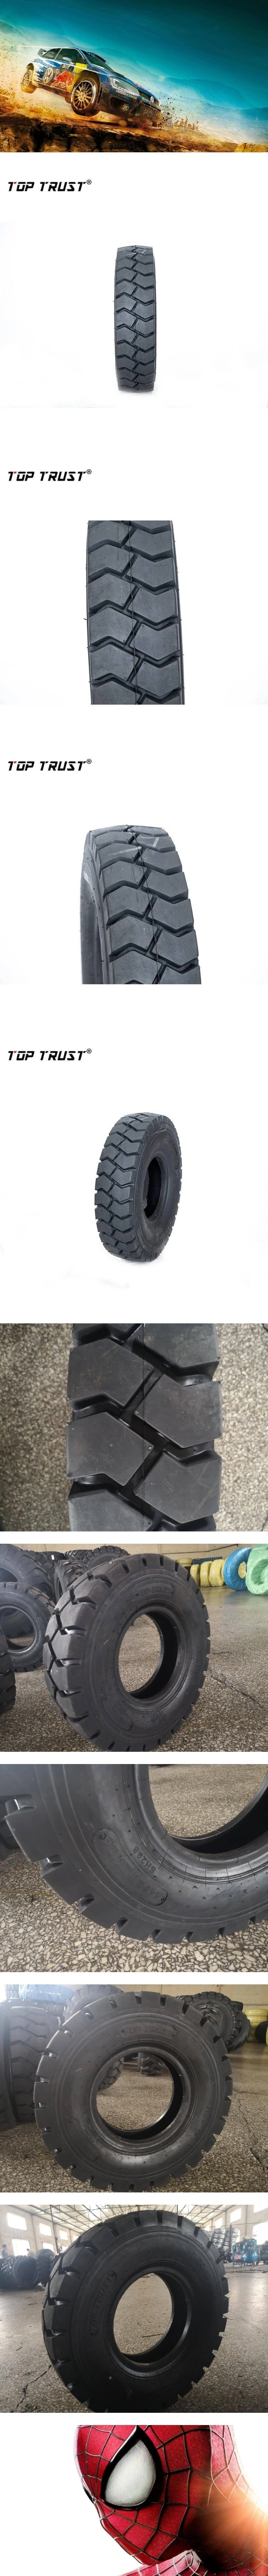 Industrial Pneumatic Tyres for Forklifts Tyre 8.25-12 7.00-12 with L-2 Pattern